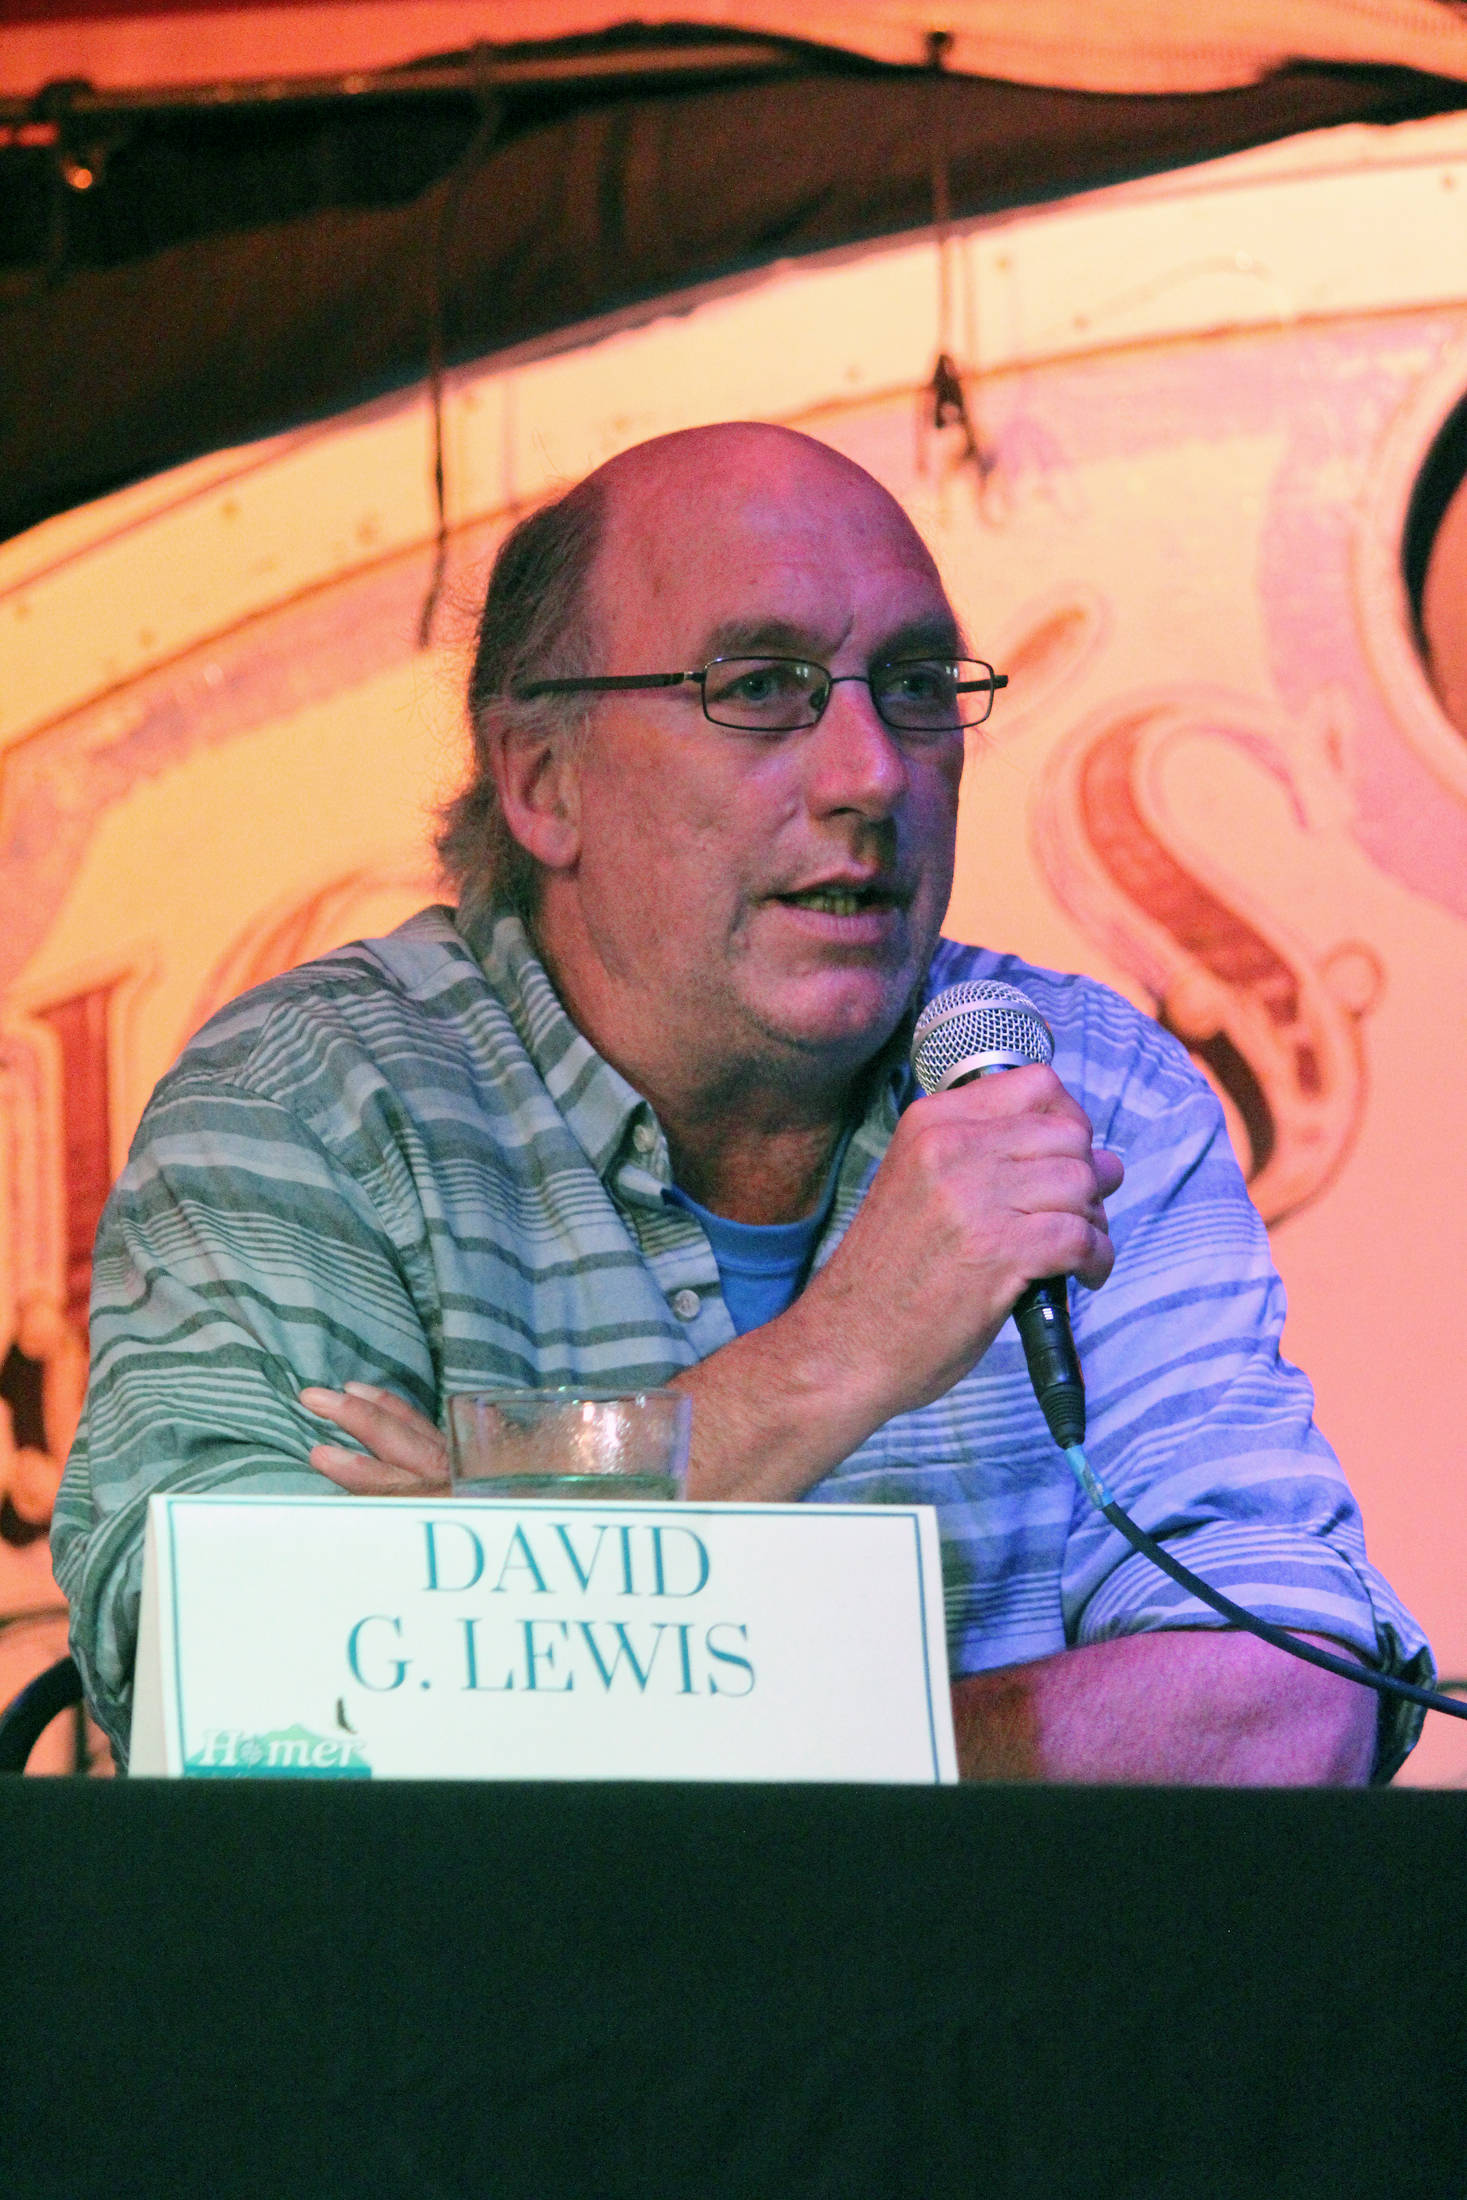 David Lewis, a former Homer City Council member, answers a question during a candidate forum Tuesday. Sept. 11, 2018 at Alice’s Champagne Palace in Homer, Alaska. Lewis, who is running for Homer mayor, participated in the forum for mayoral and council candidates hosted by the Homer Chamber of Commerce. (Photo by Megan Pacer/Homer News)